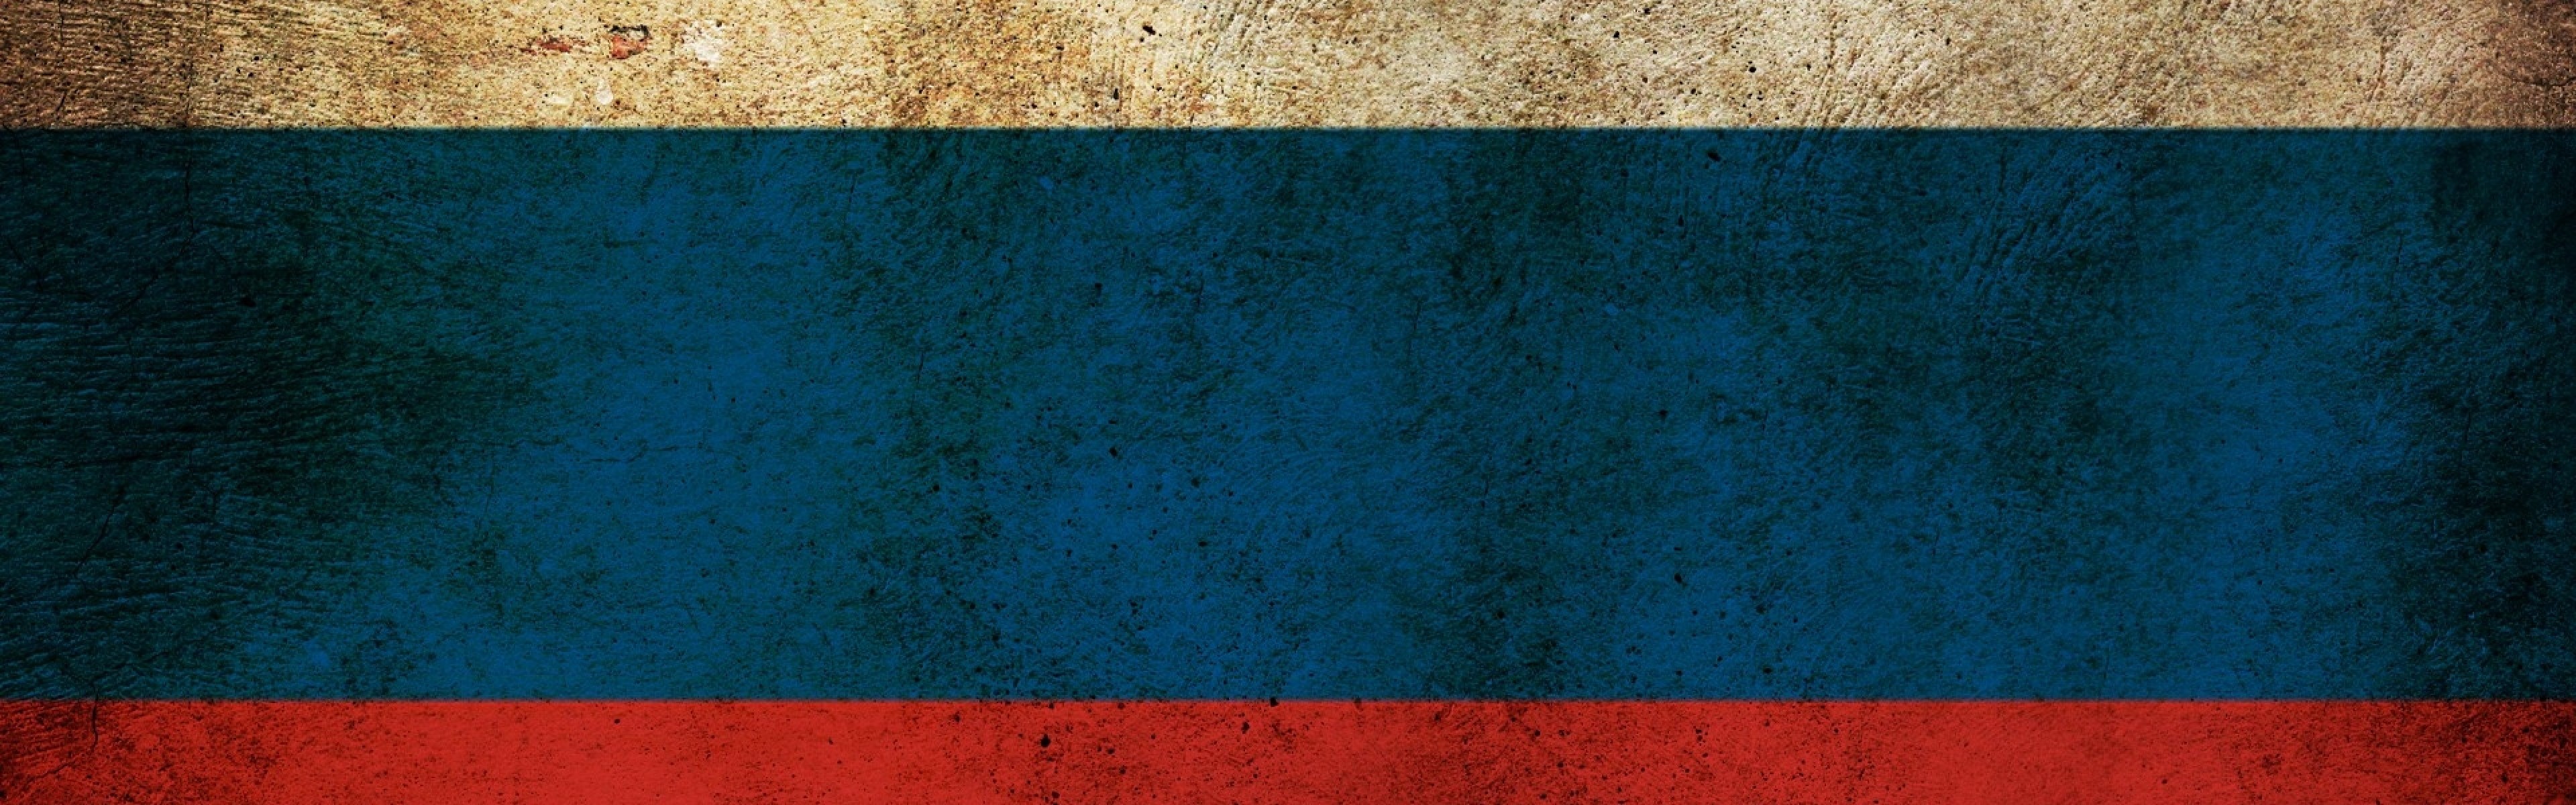 3840x1200 Preview wallpaper flag, texture, background, russia, symbolism 